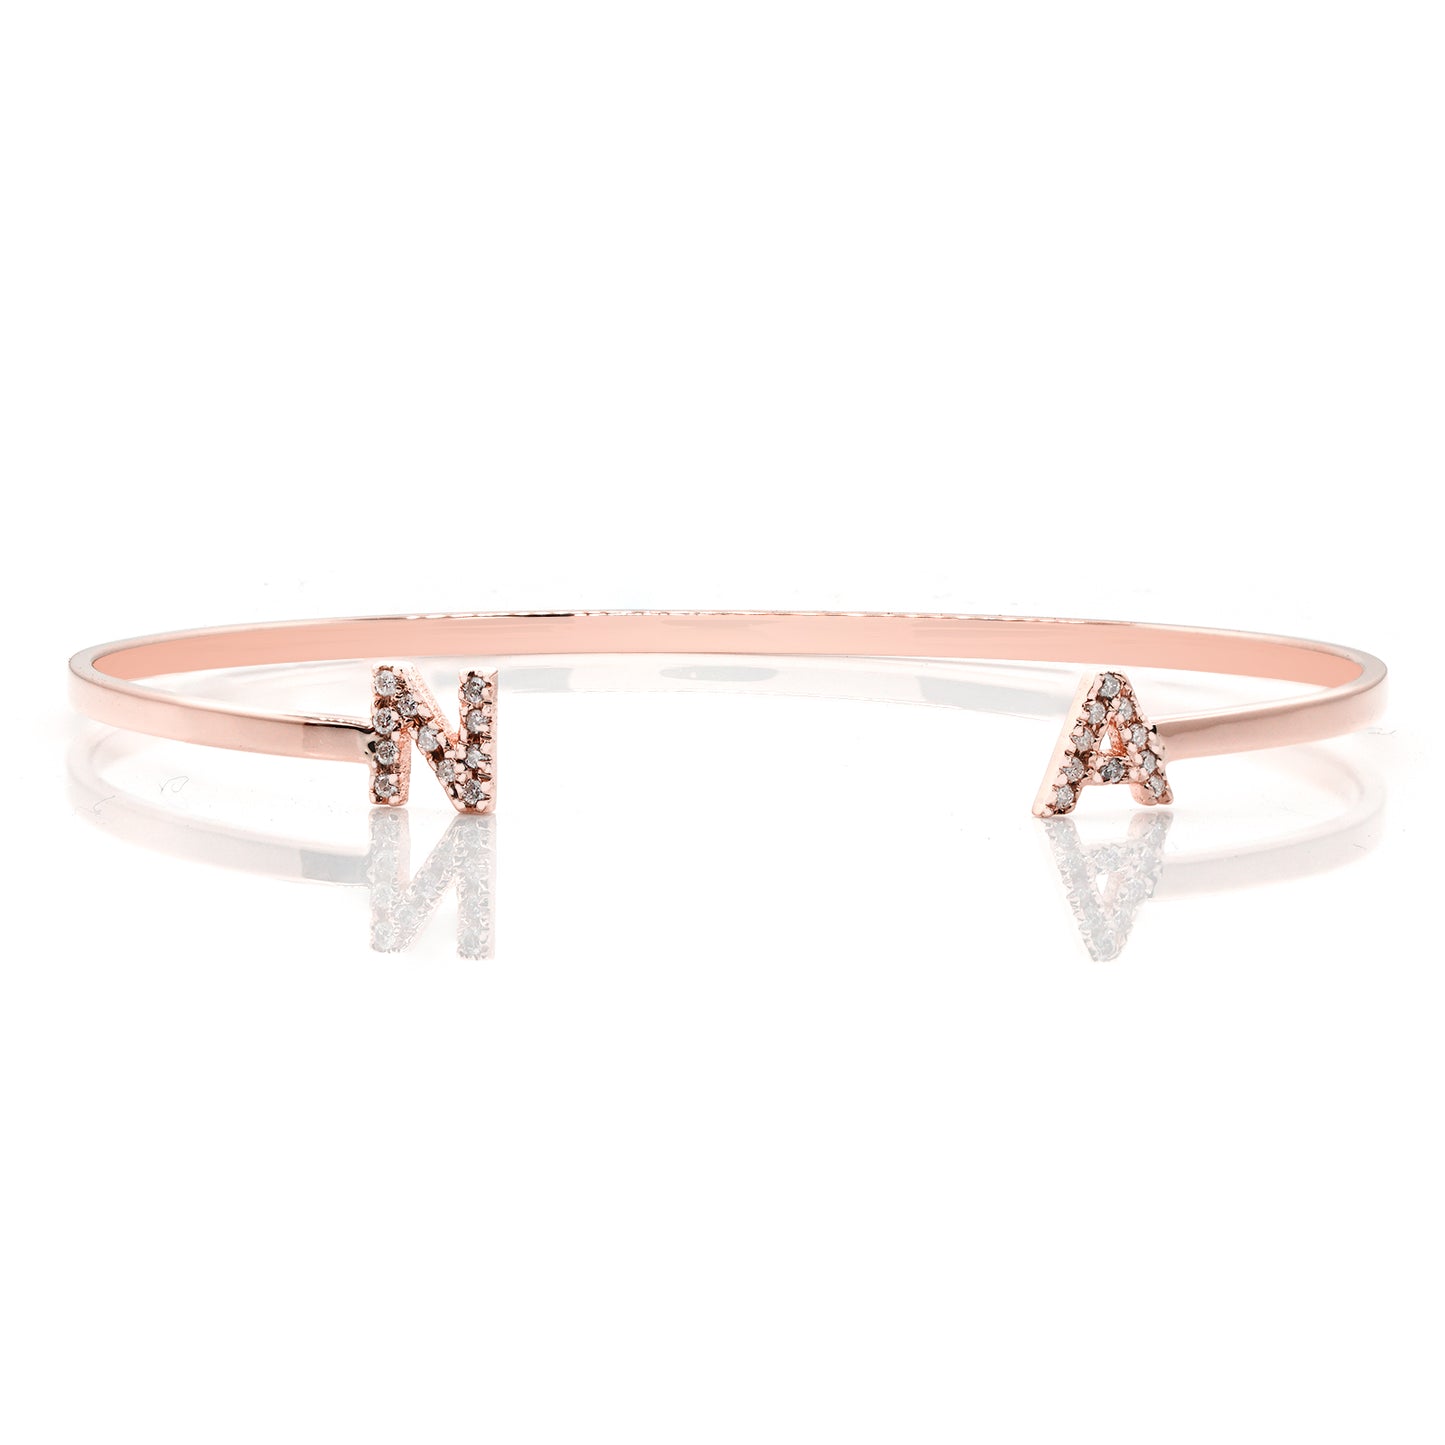 Initial Ends Bangle in 14K Gold | 6mm Tall